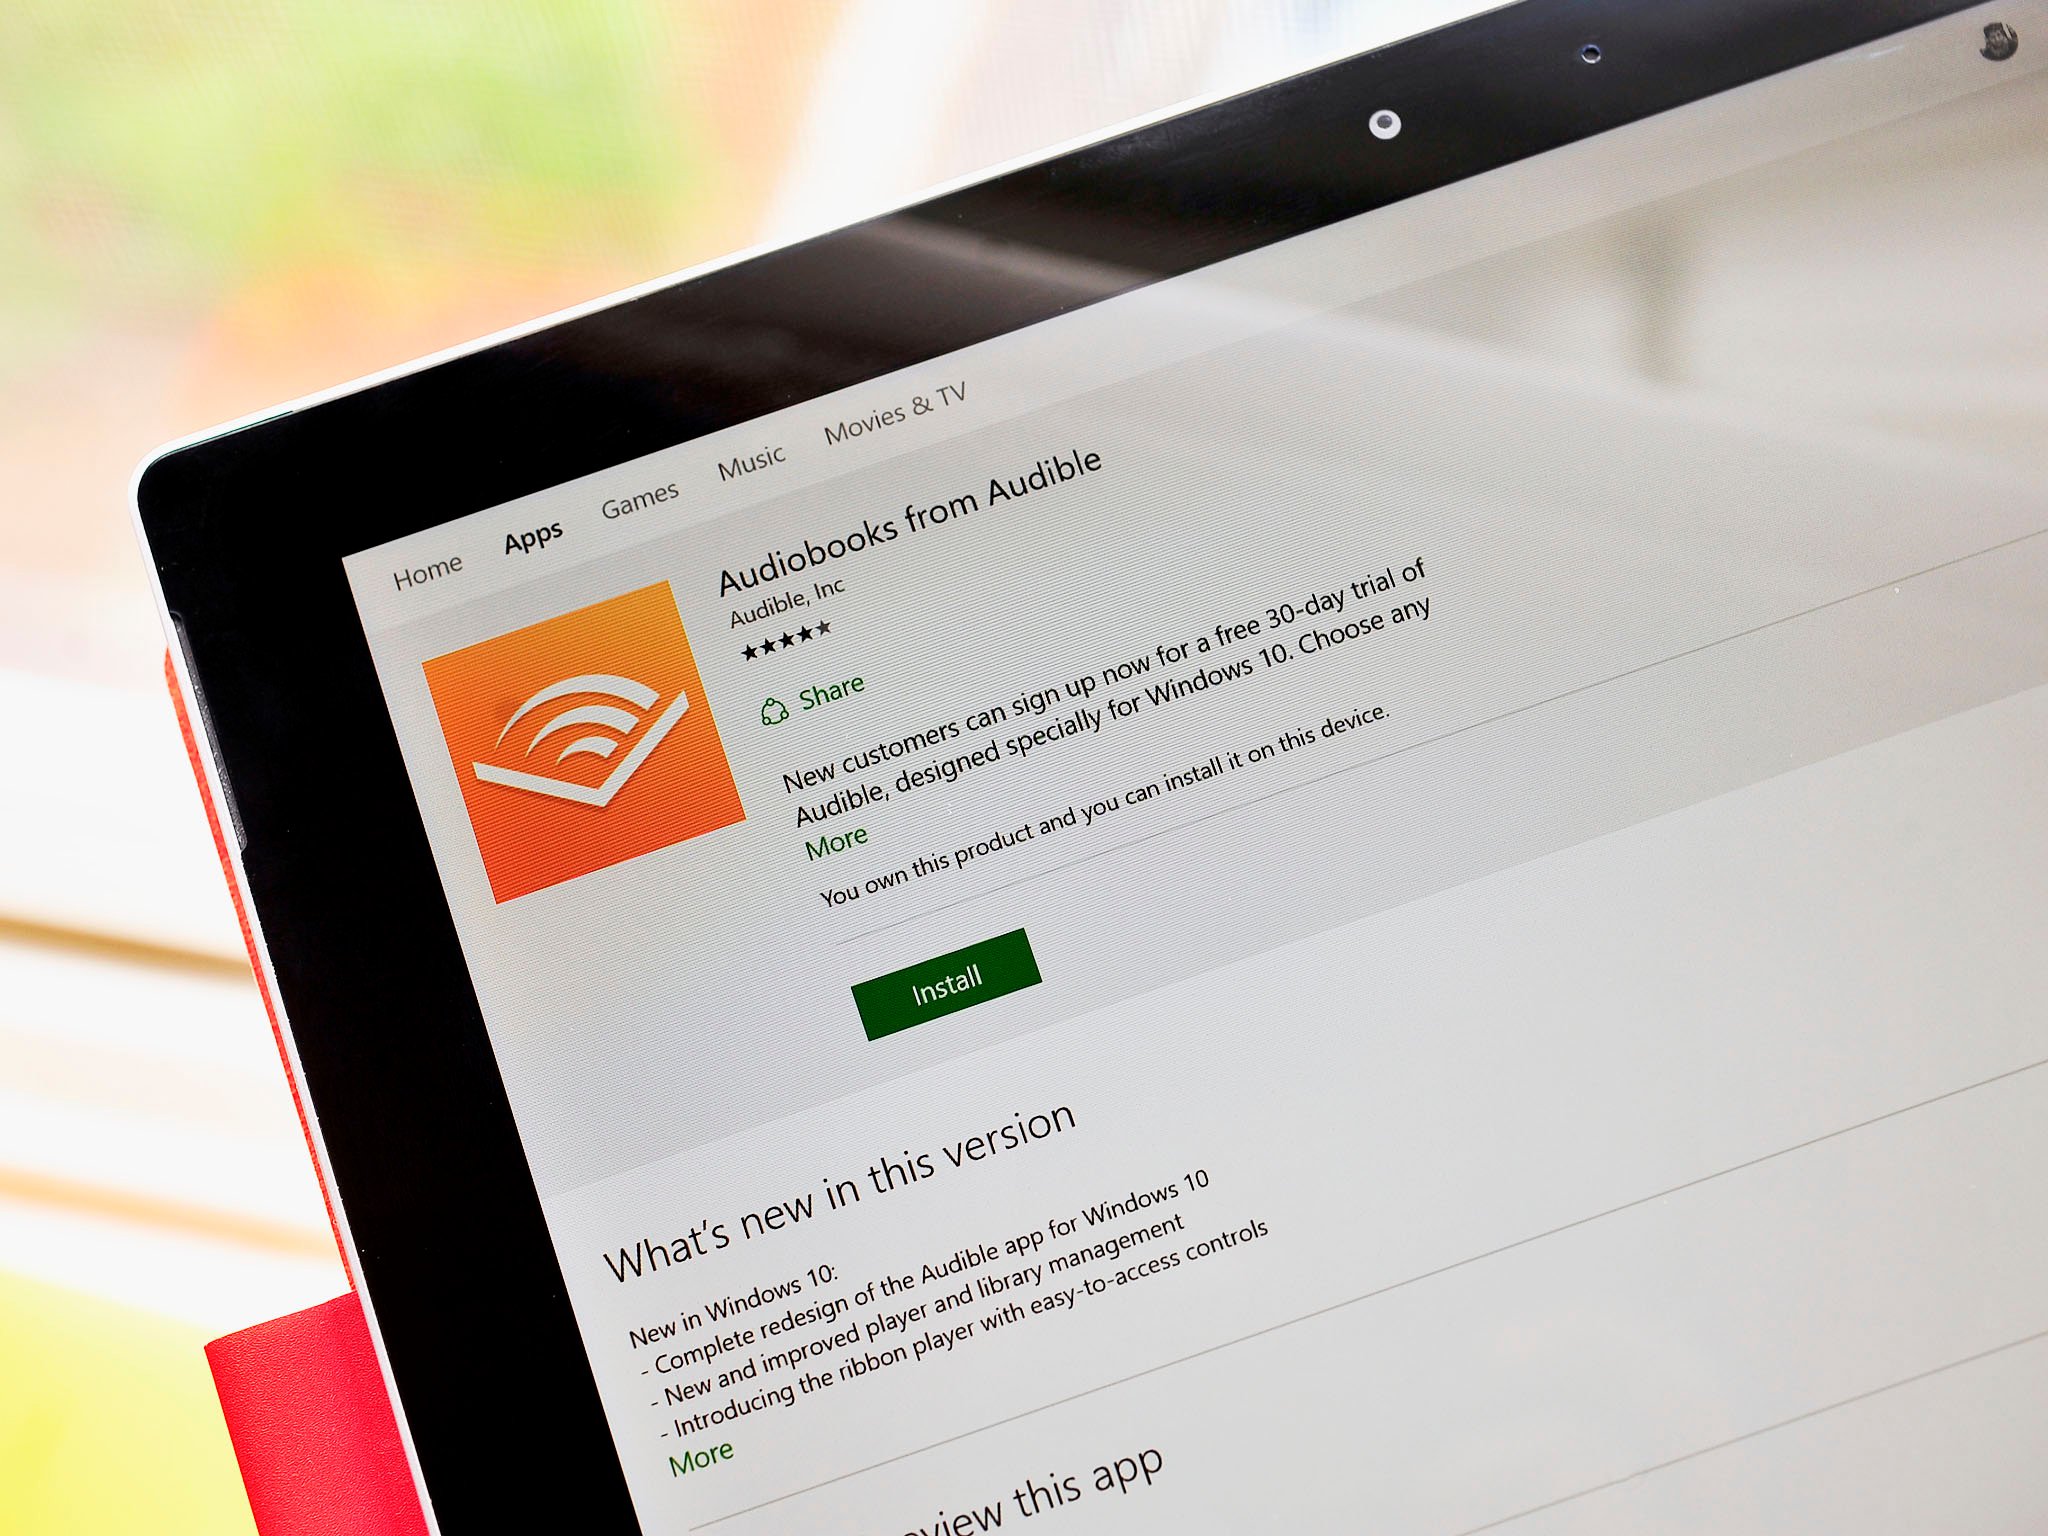 Audible for Windows 10 brings playback controls to the taskbar